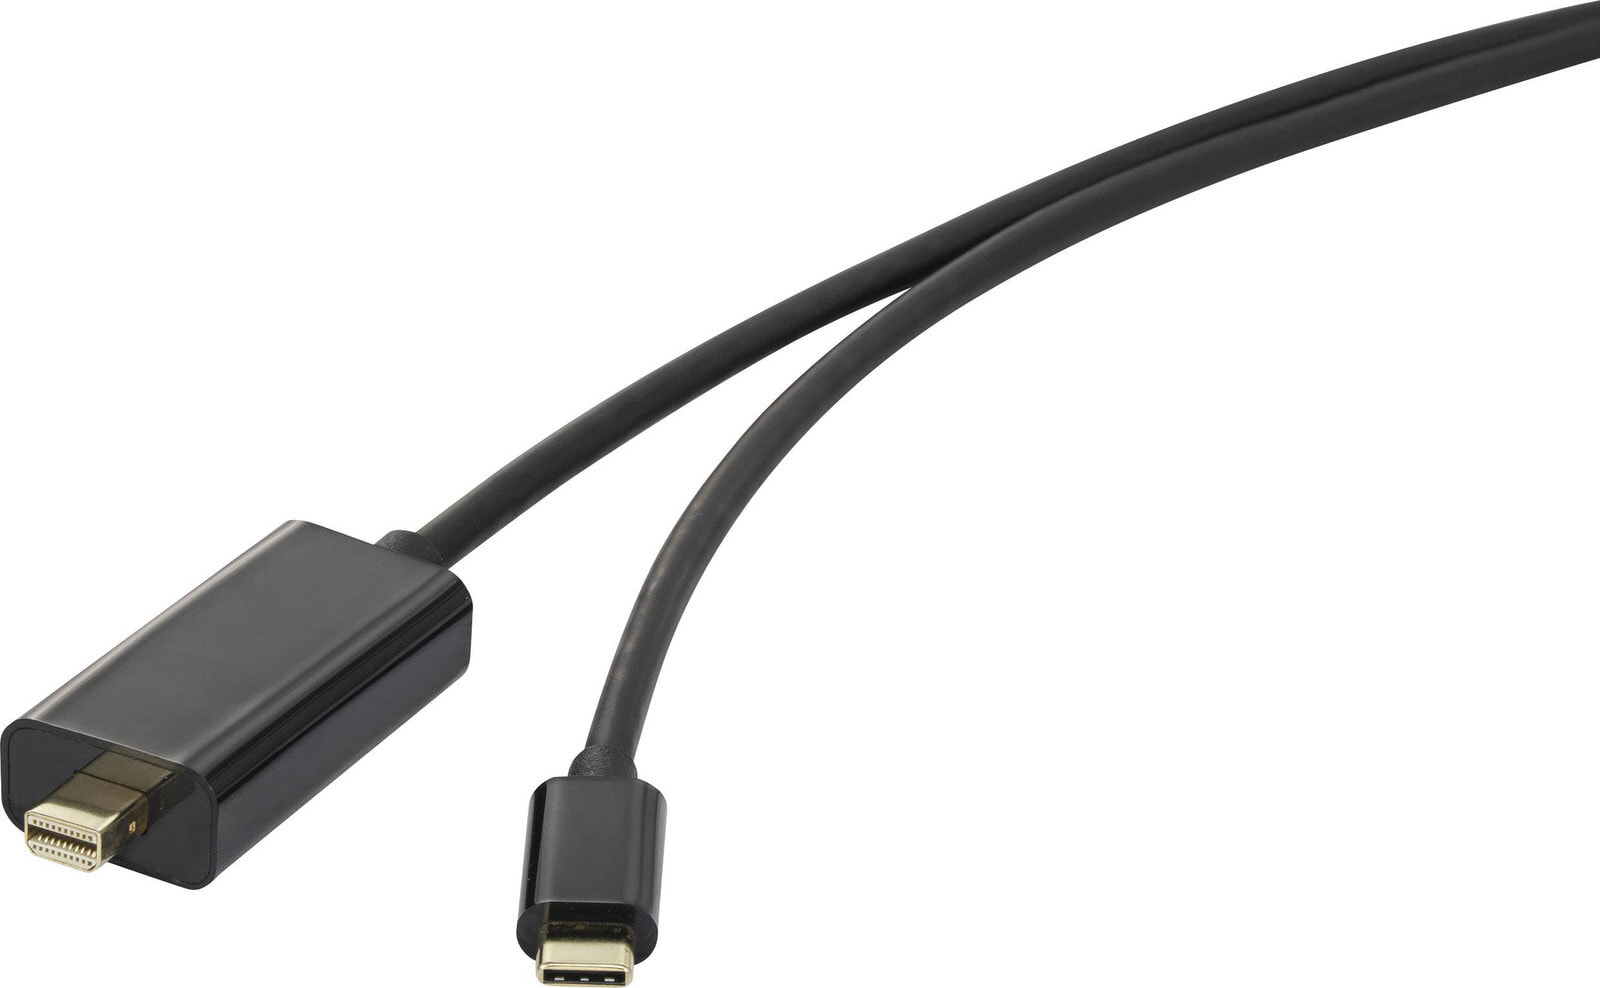 RF-3421676. Cable length: 3 m, Connector 1: USB Type-C, Connector 2: Mini DisplayPort